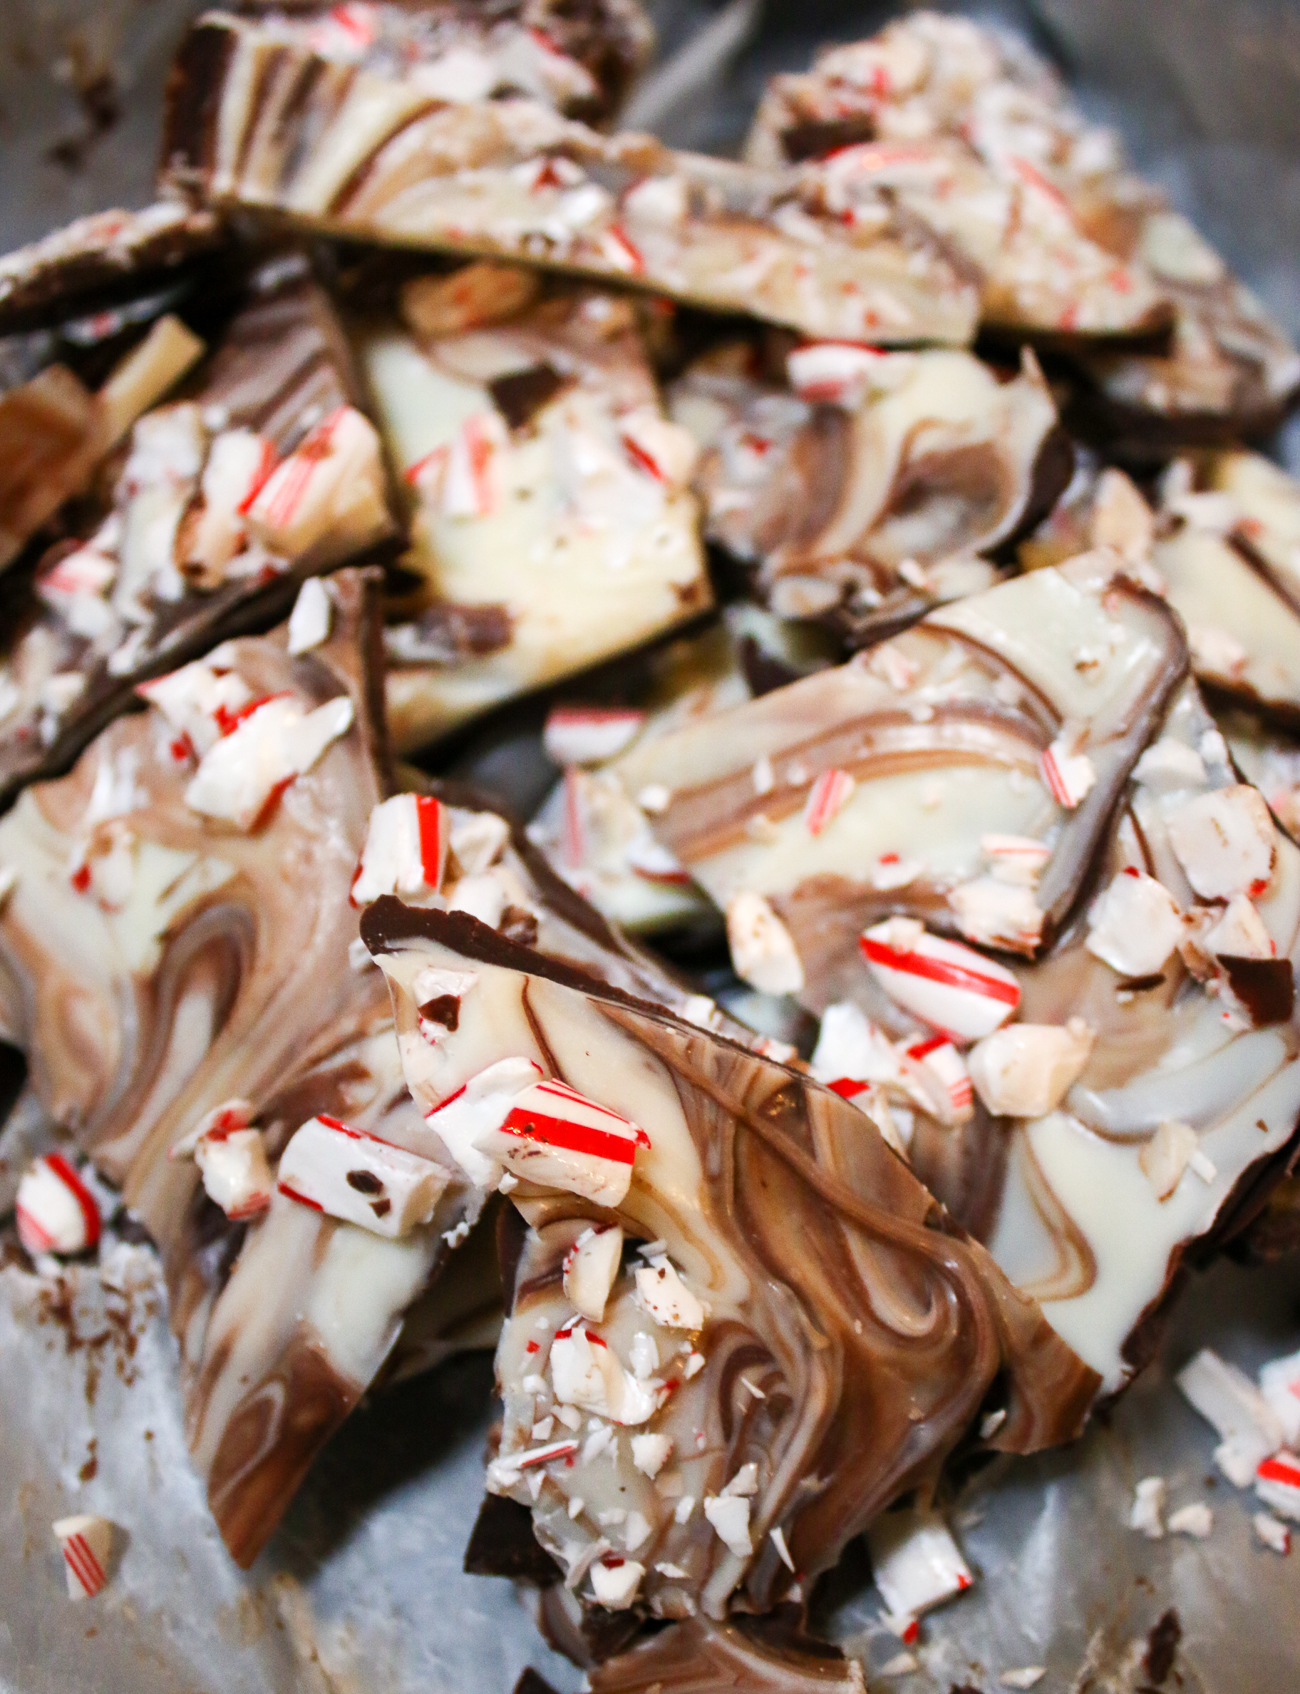 Homemade peppermint bark recipe adapted from Elisabet Der Nederlanden's "Holiday Cookies" that tastes exactly like the famous William Sonoma Peppermint Bark by southern blogger Stephanie Ziajka from Diary of a Debutante